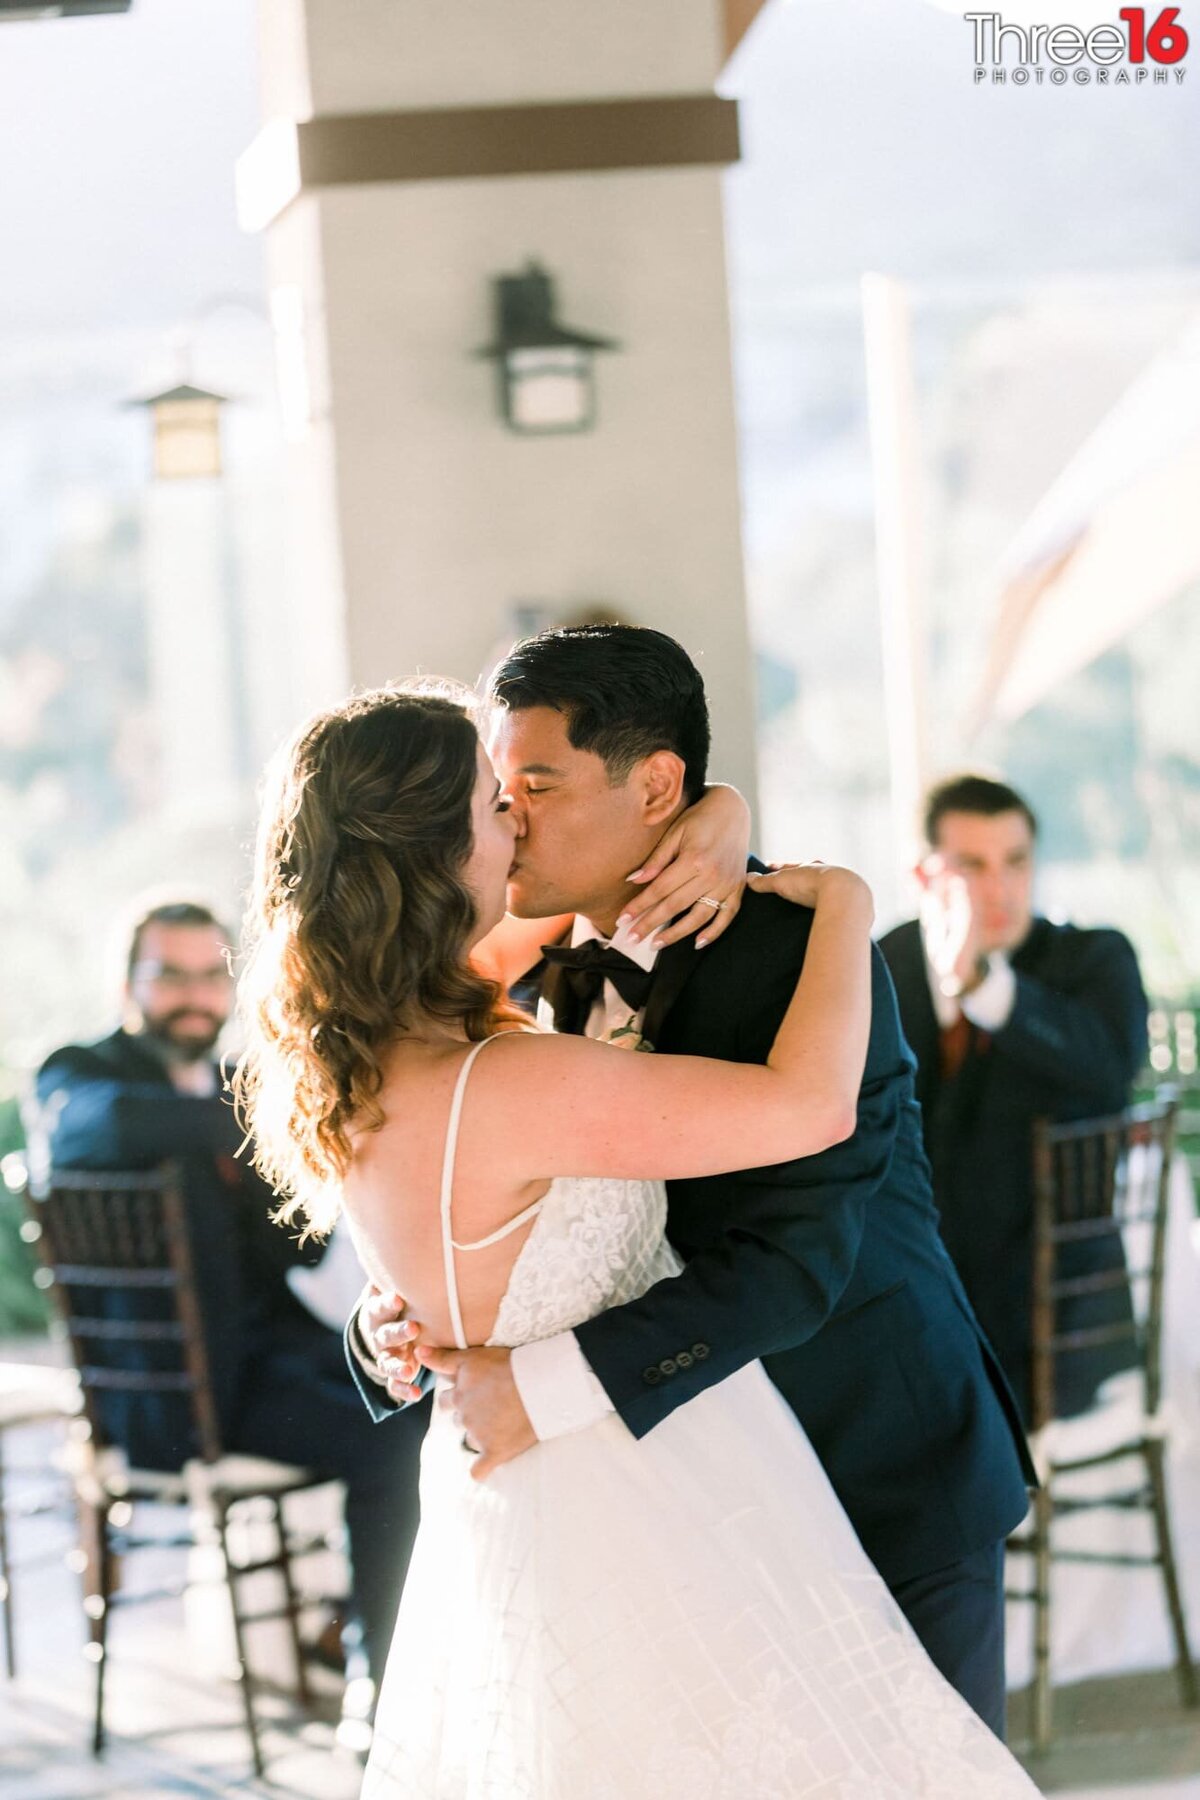 Bride and Groom share a tender kiss during their first dance